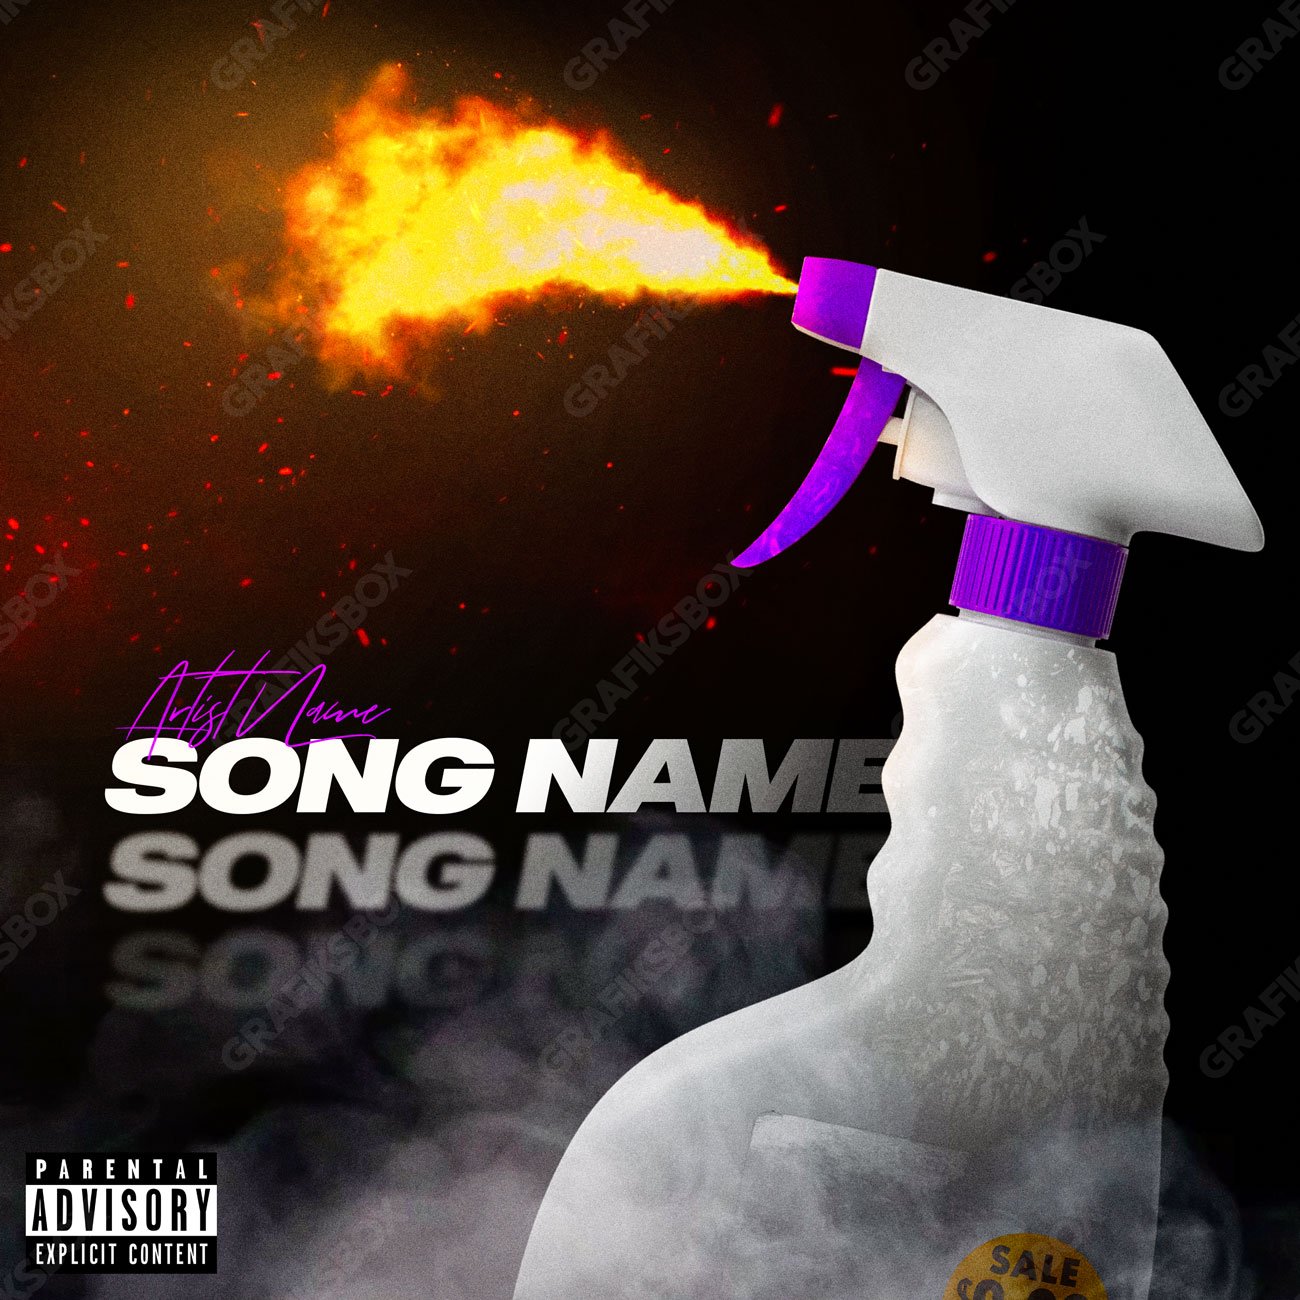 Cleaning premade cover art